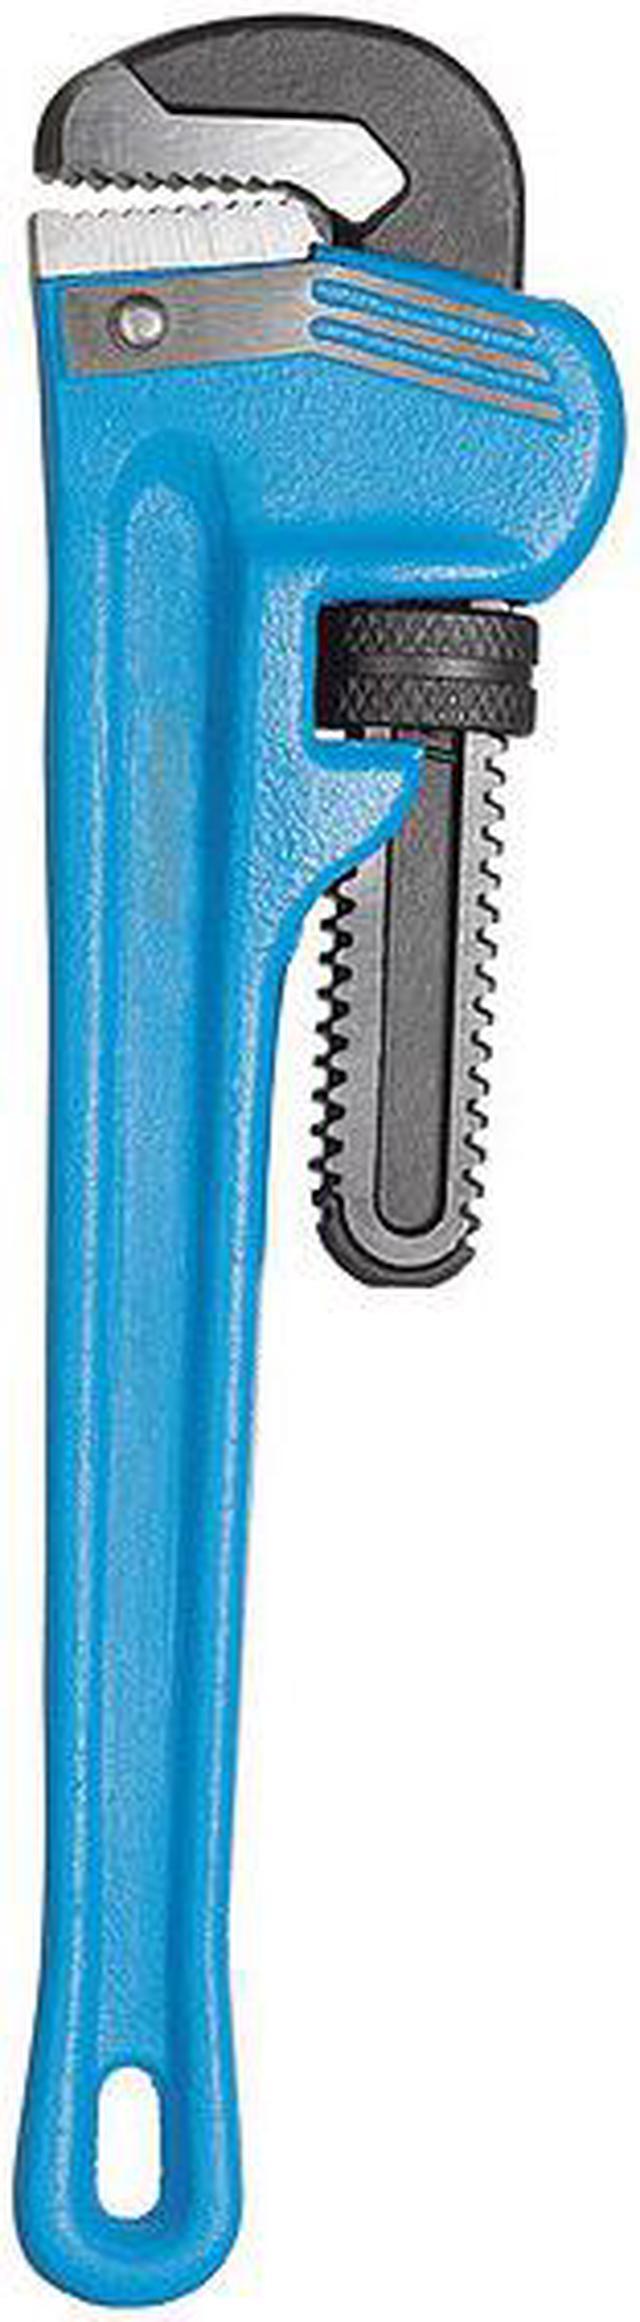 Straight Pipe Wrench, Cast Iron, 10 in.